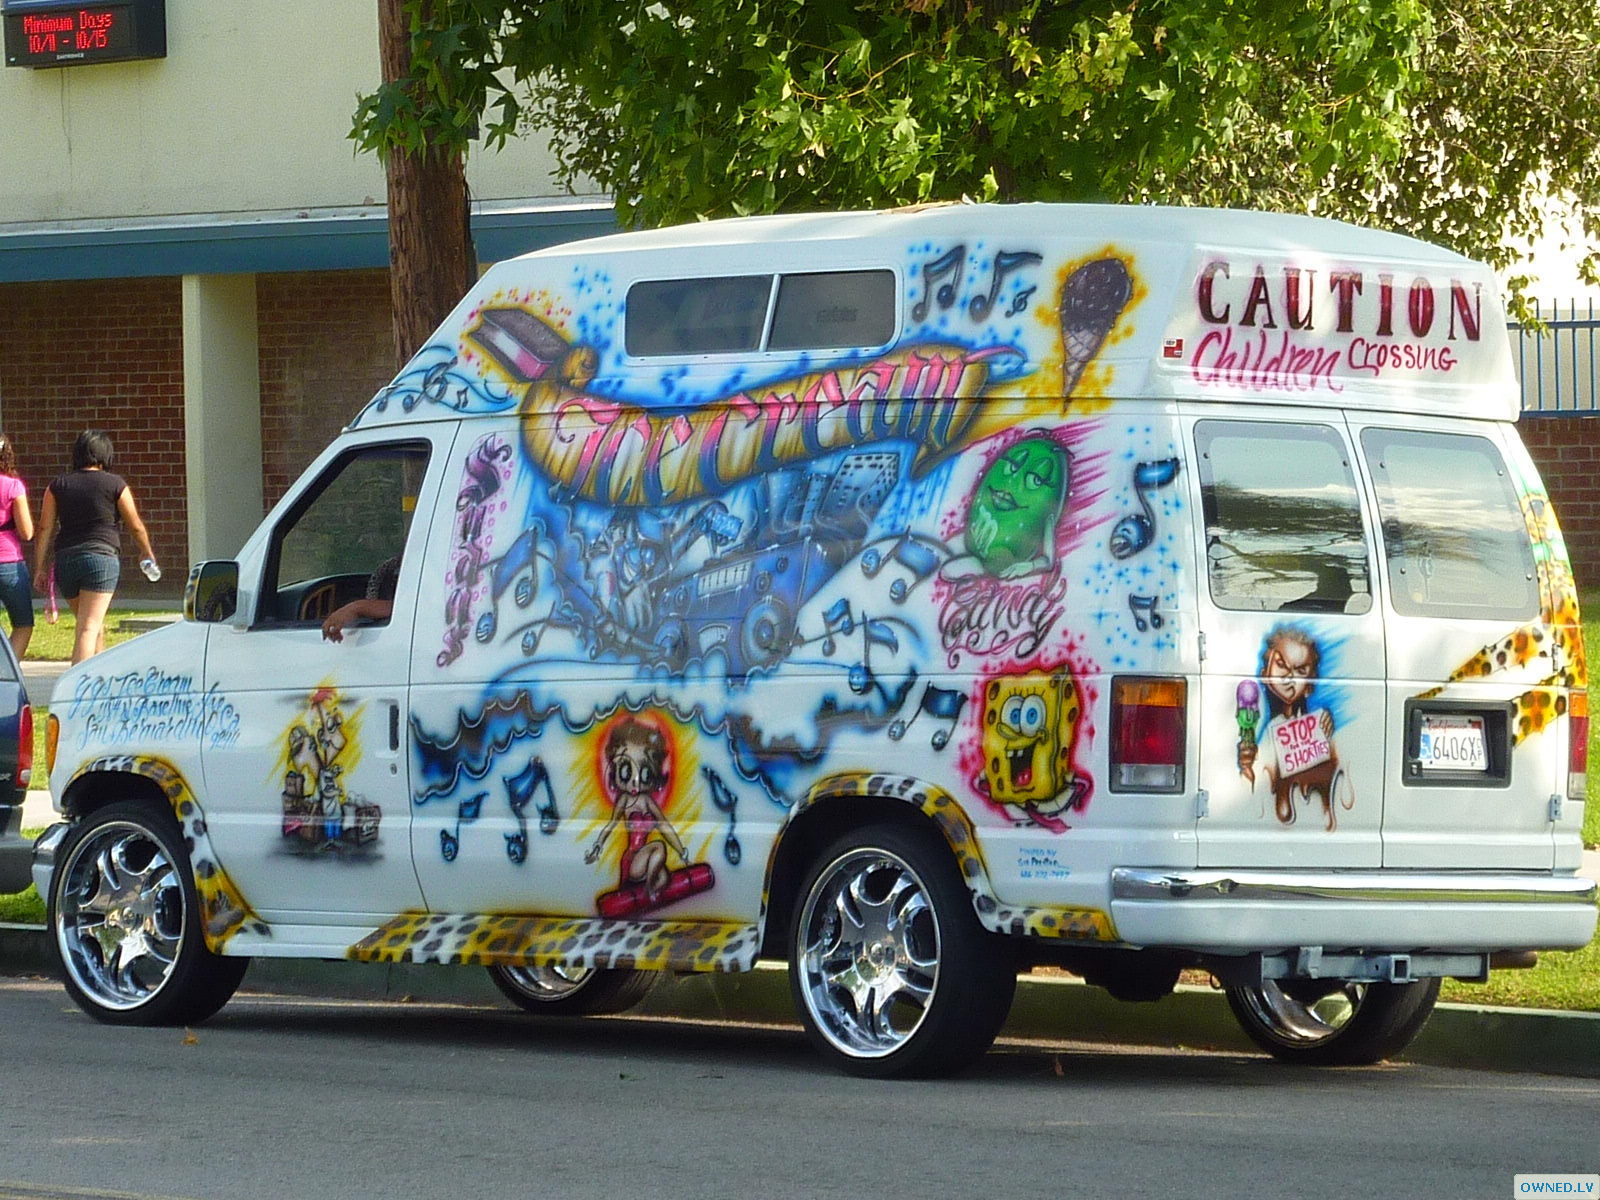 This is how we get our ice cream in SoCal, pimpin baby...